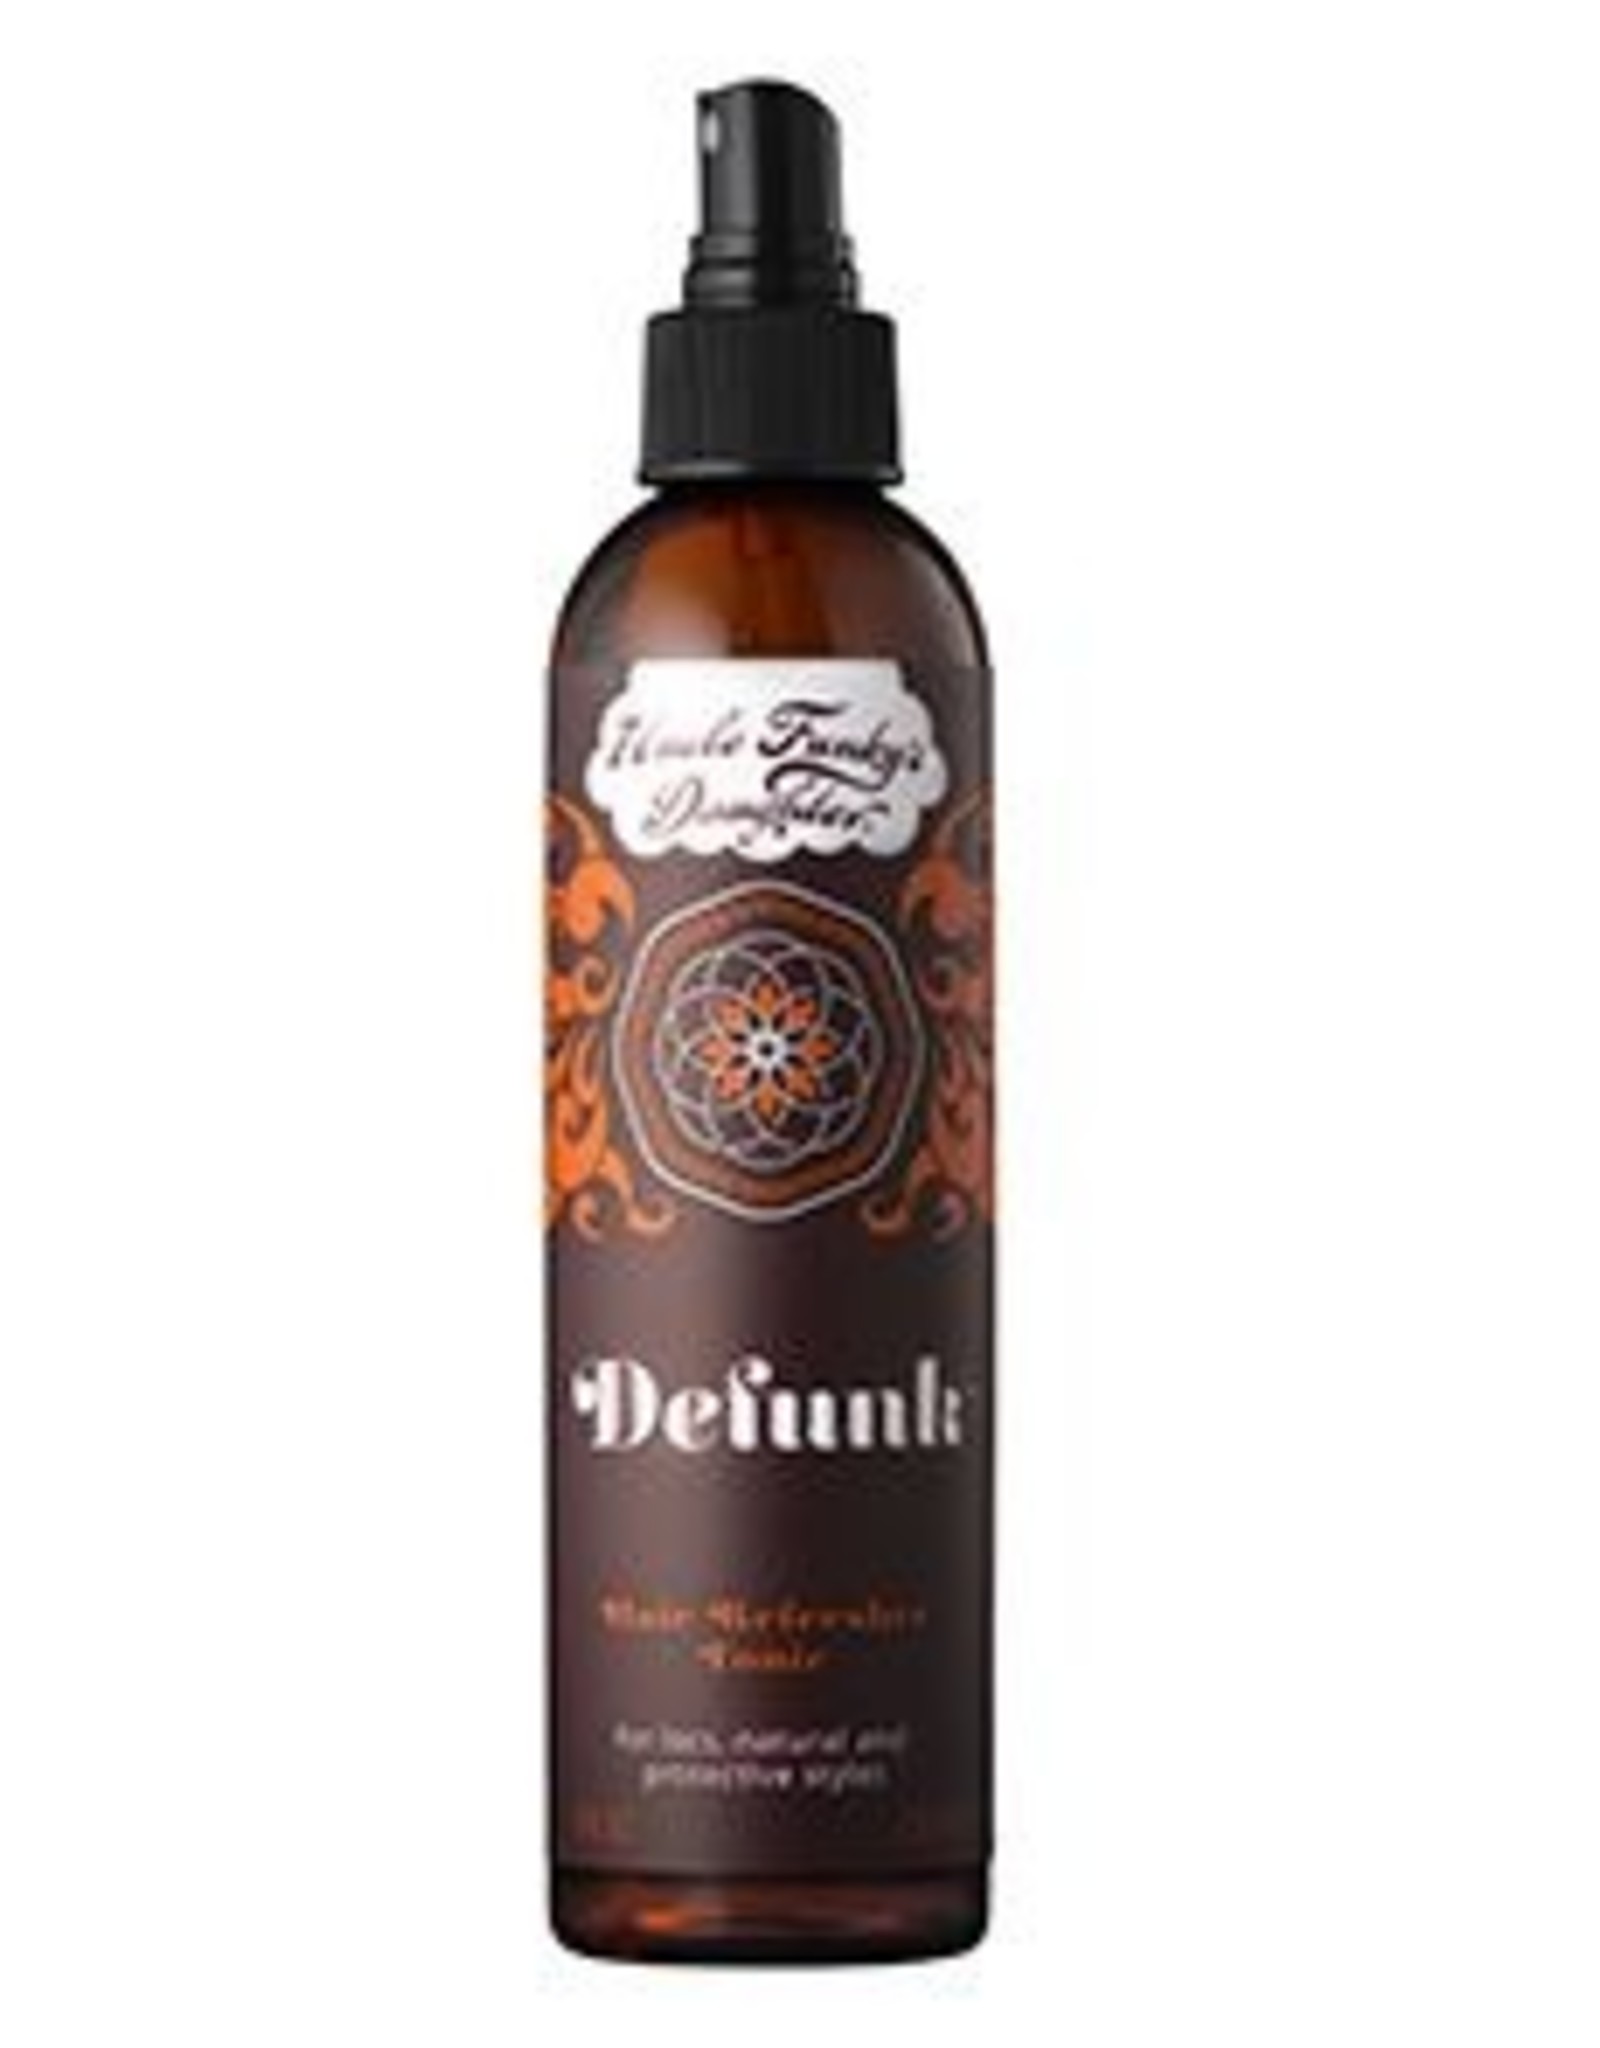 UNCLE FUNKY DEFUNK HAIR REFRESHER TONIC 8fl oz